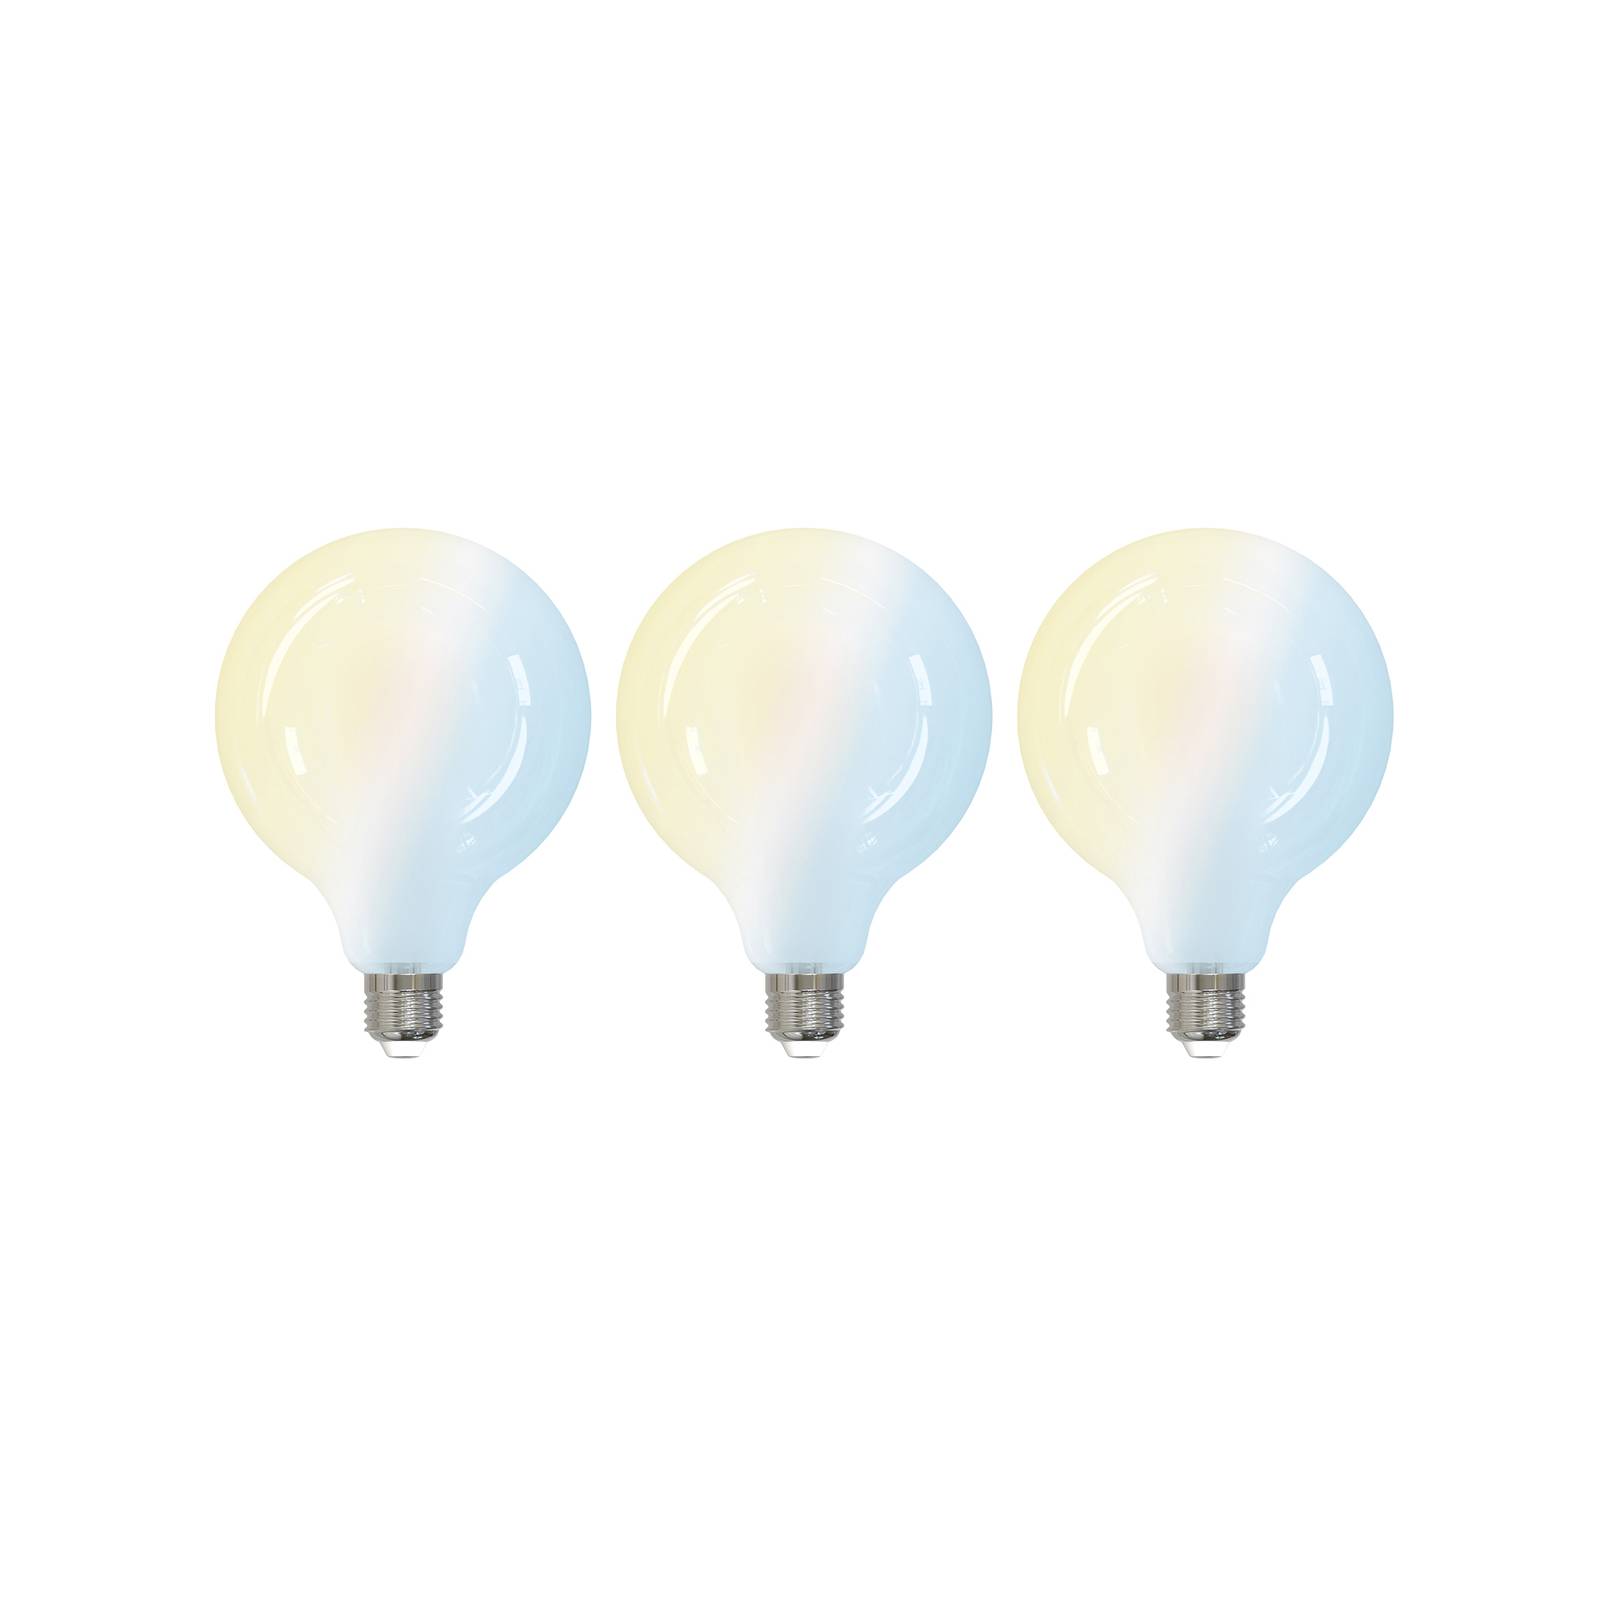 PRIOS E27 G125 LED-lampa 7W tunable white wi-fi 3-pack